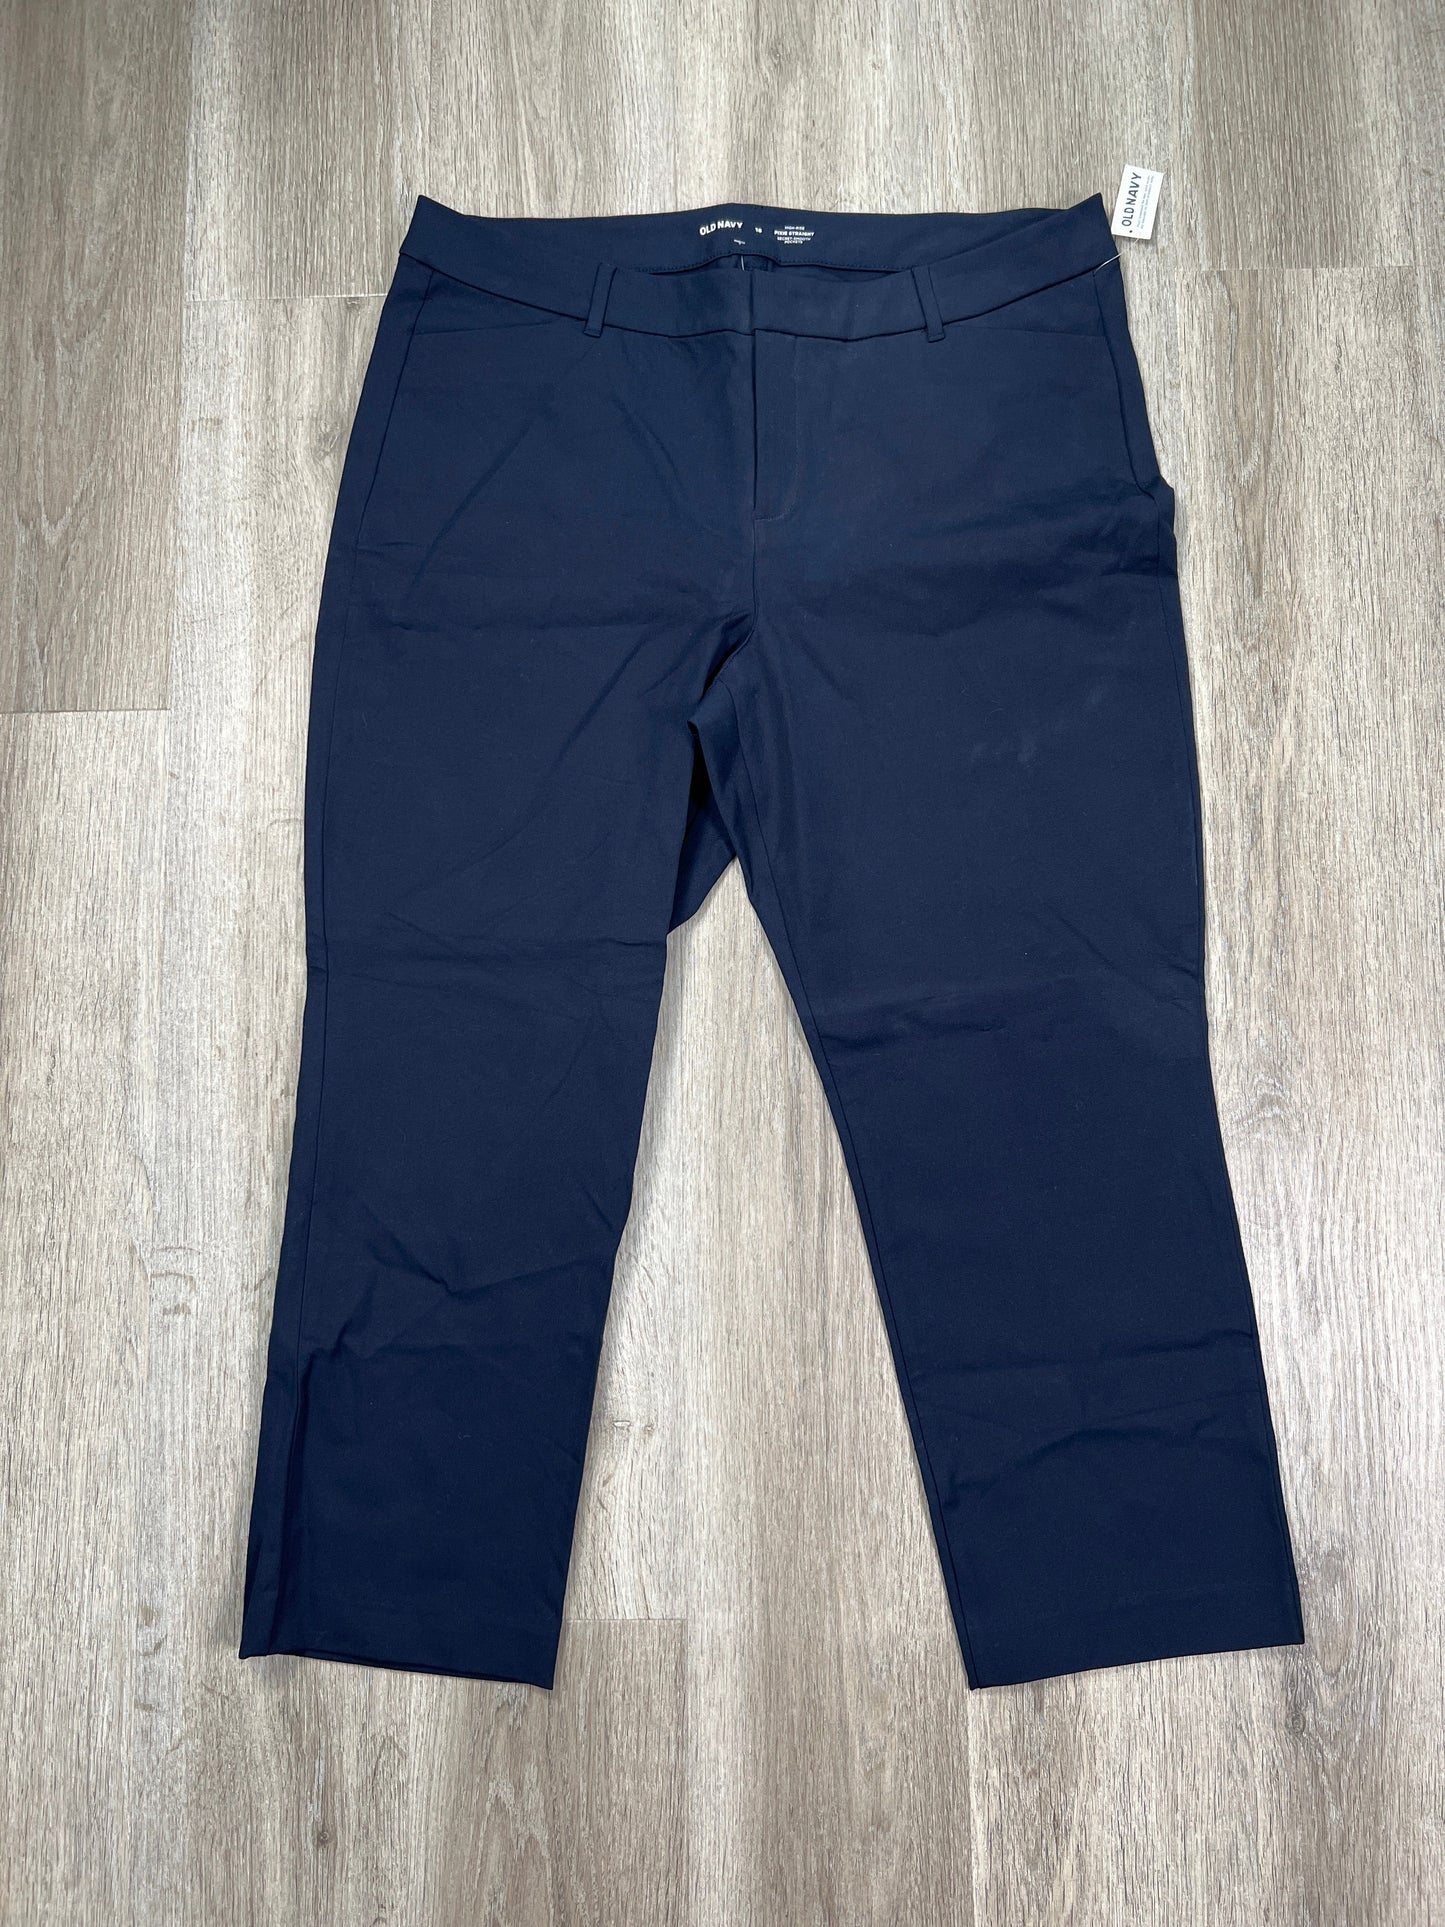 Navy Pants Cropped Old Navy, Size 18